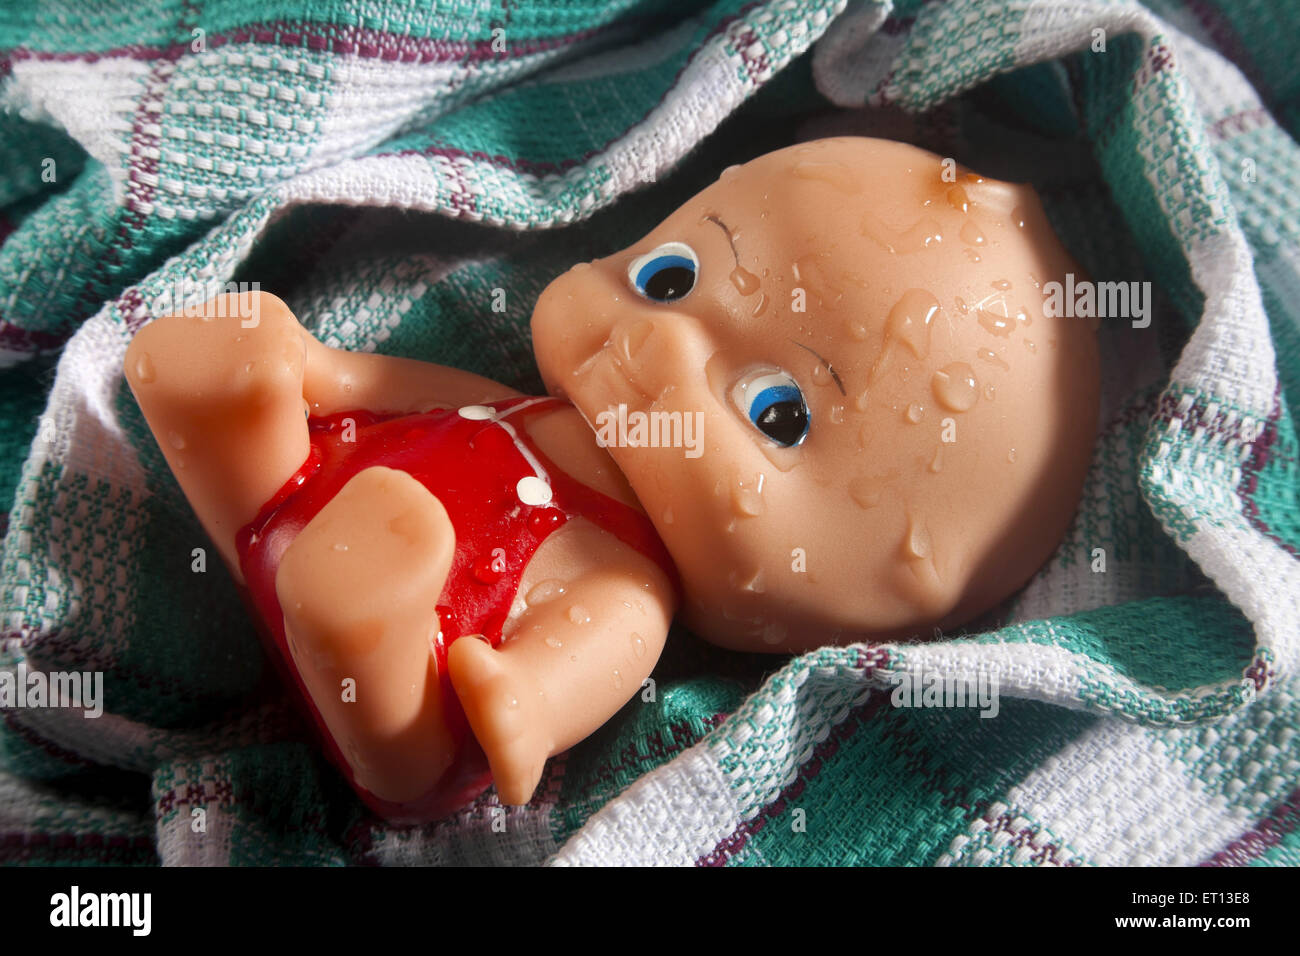 Toy Baby made from Rubber on Cotton fabric Towel India Asia Sept 2011 Stock Photo